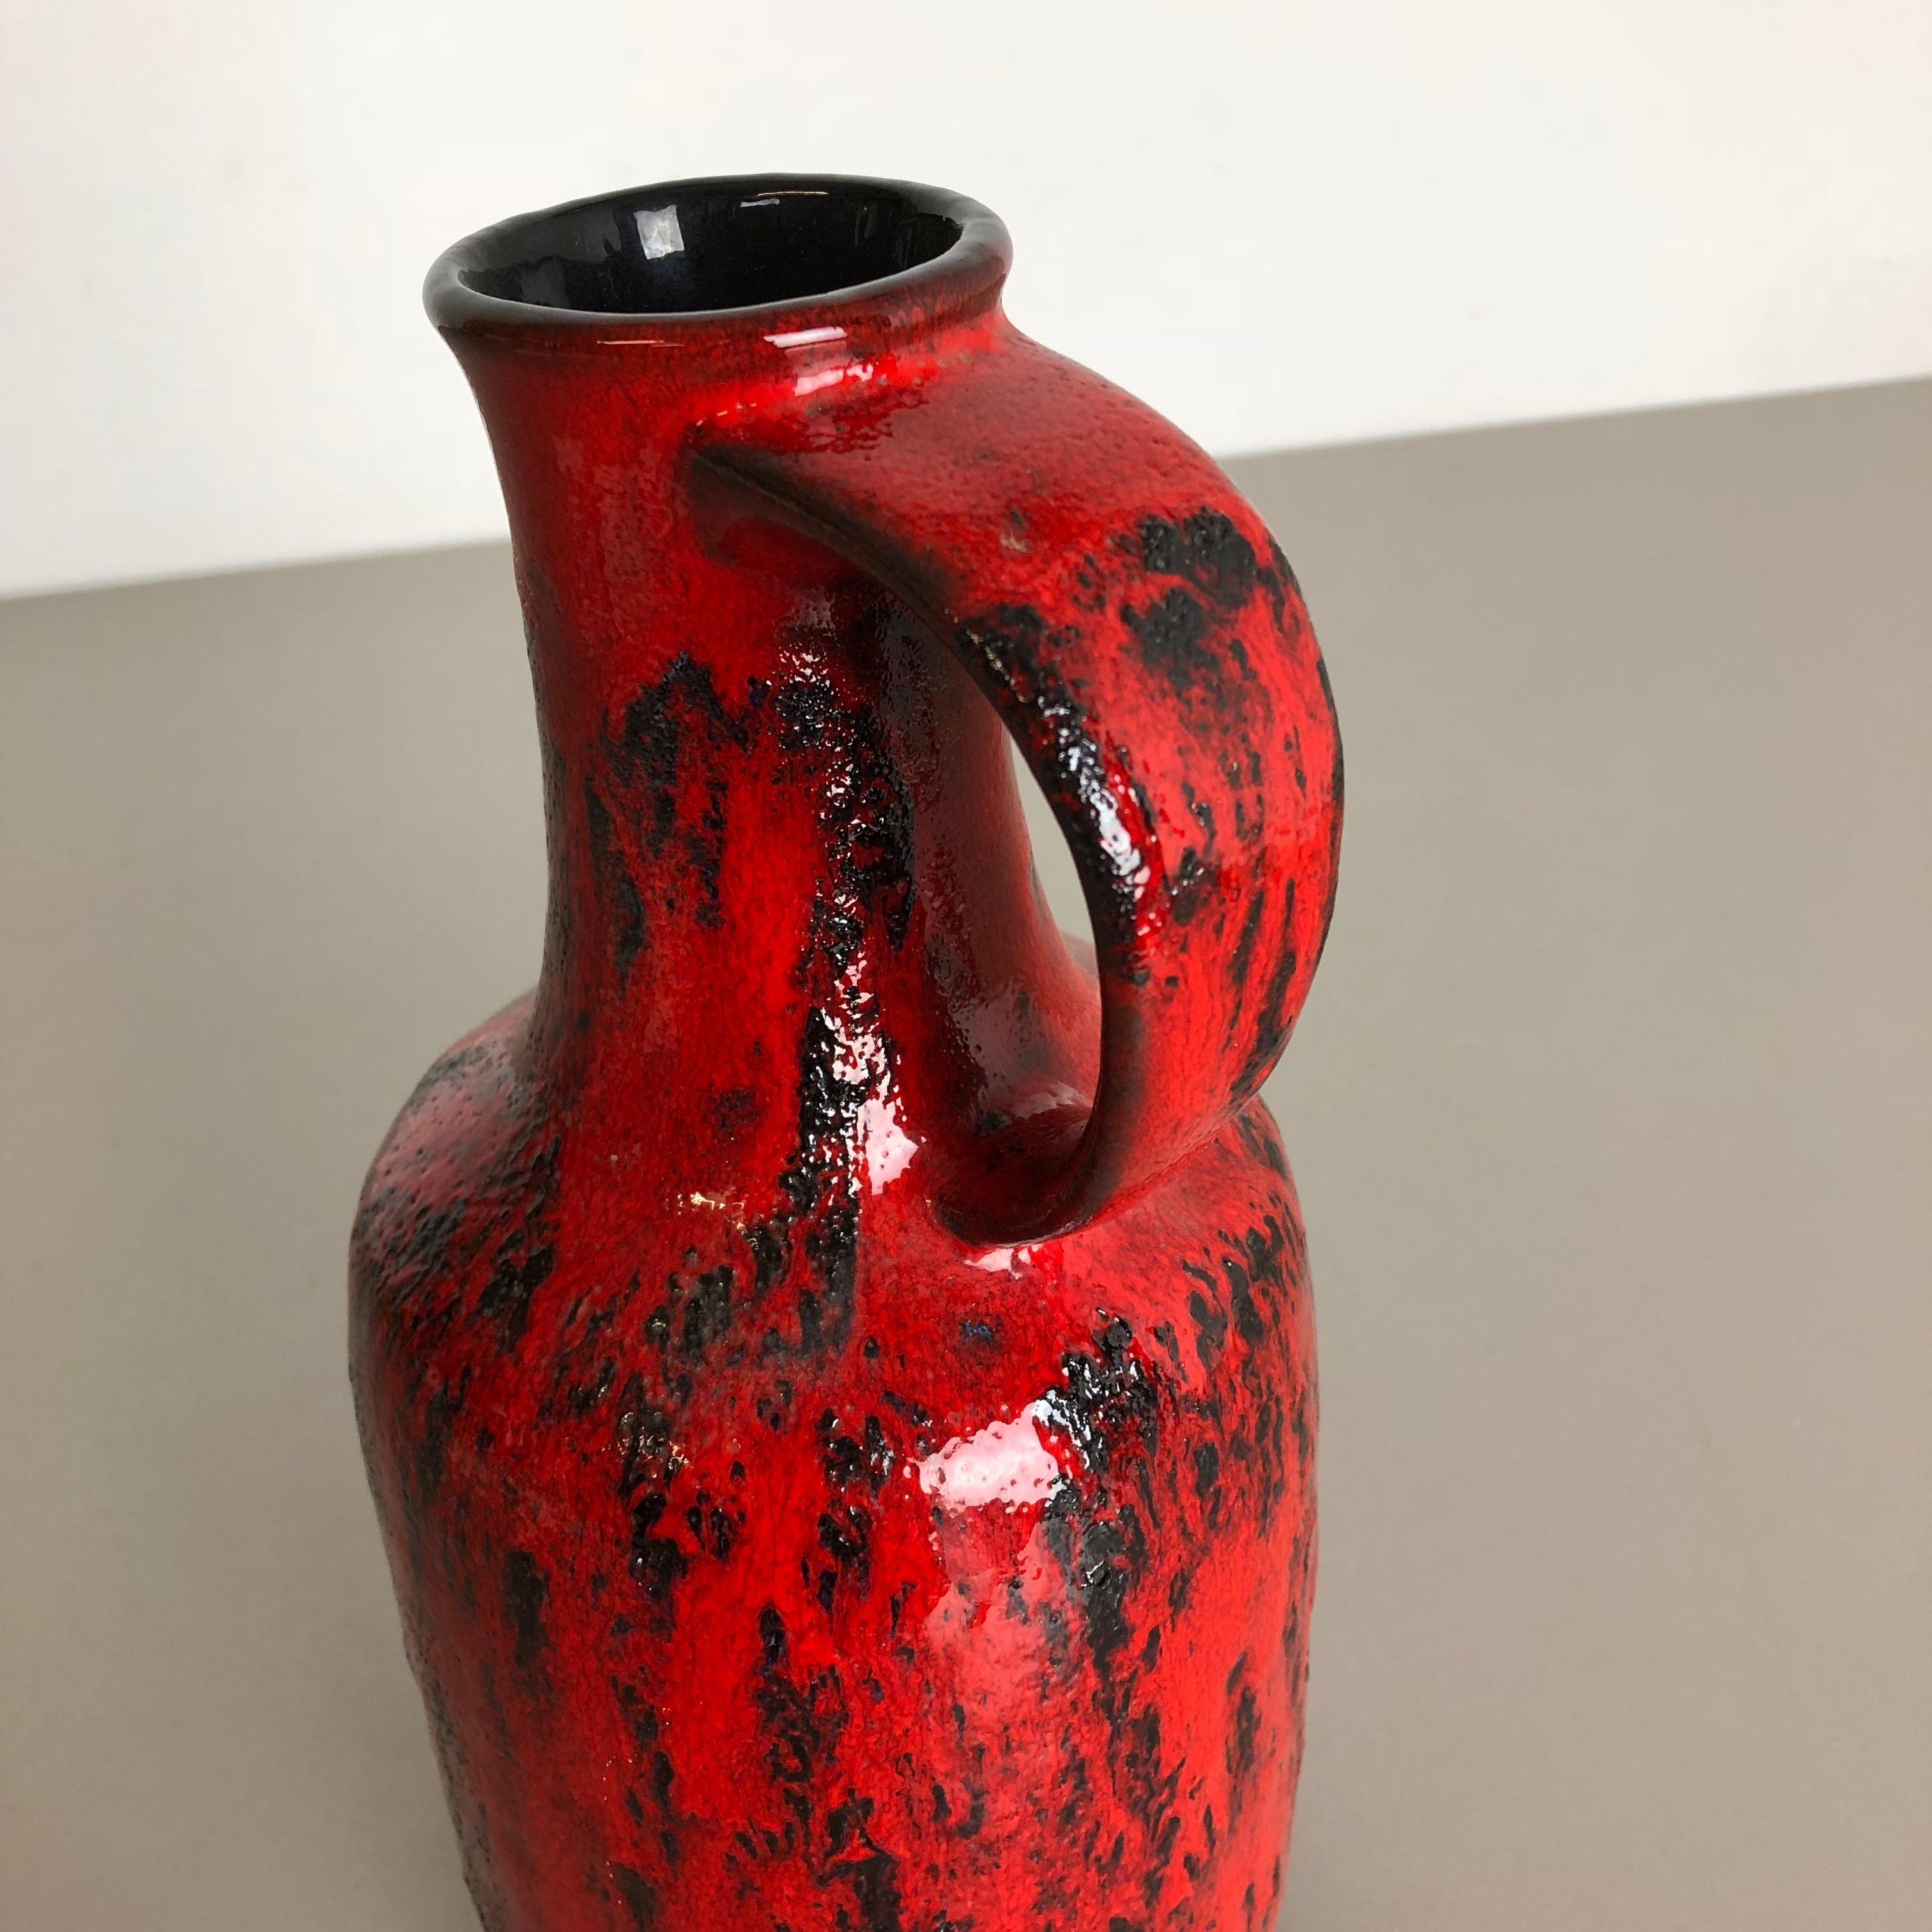 Super Colorful Fat Lava Pottery Vase by Gräflich Ortenburg, Germany, 1950s For Sale 2